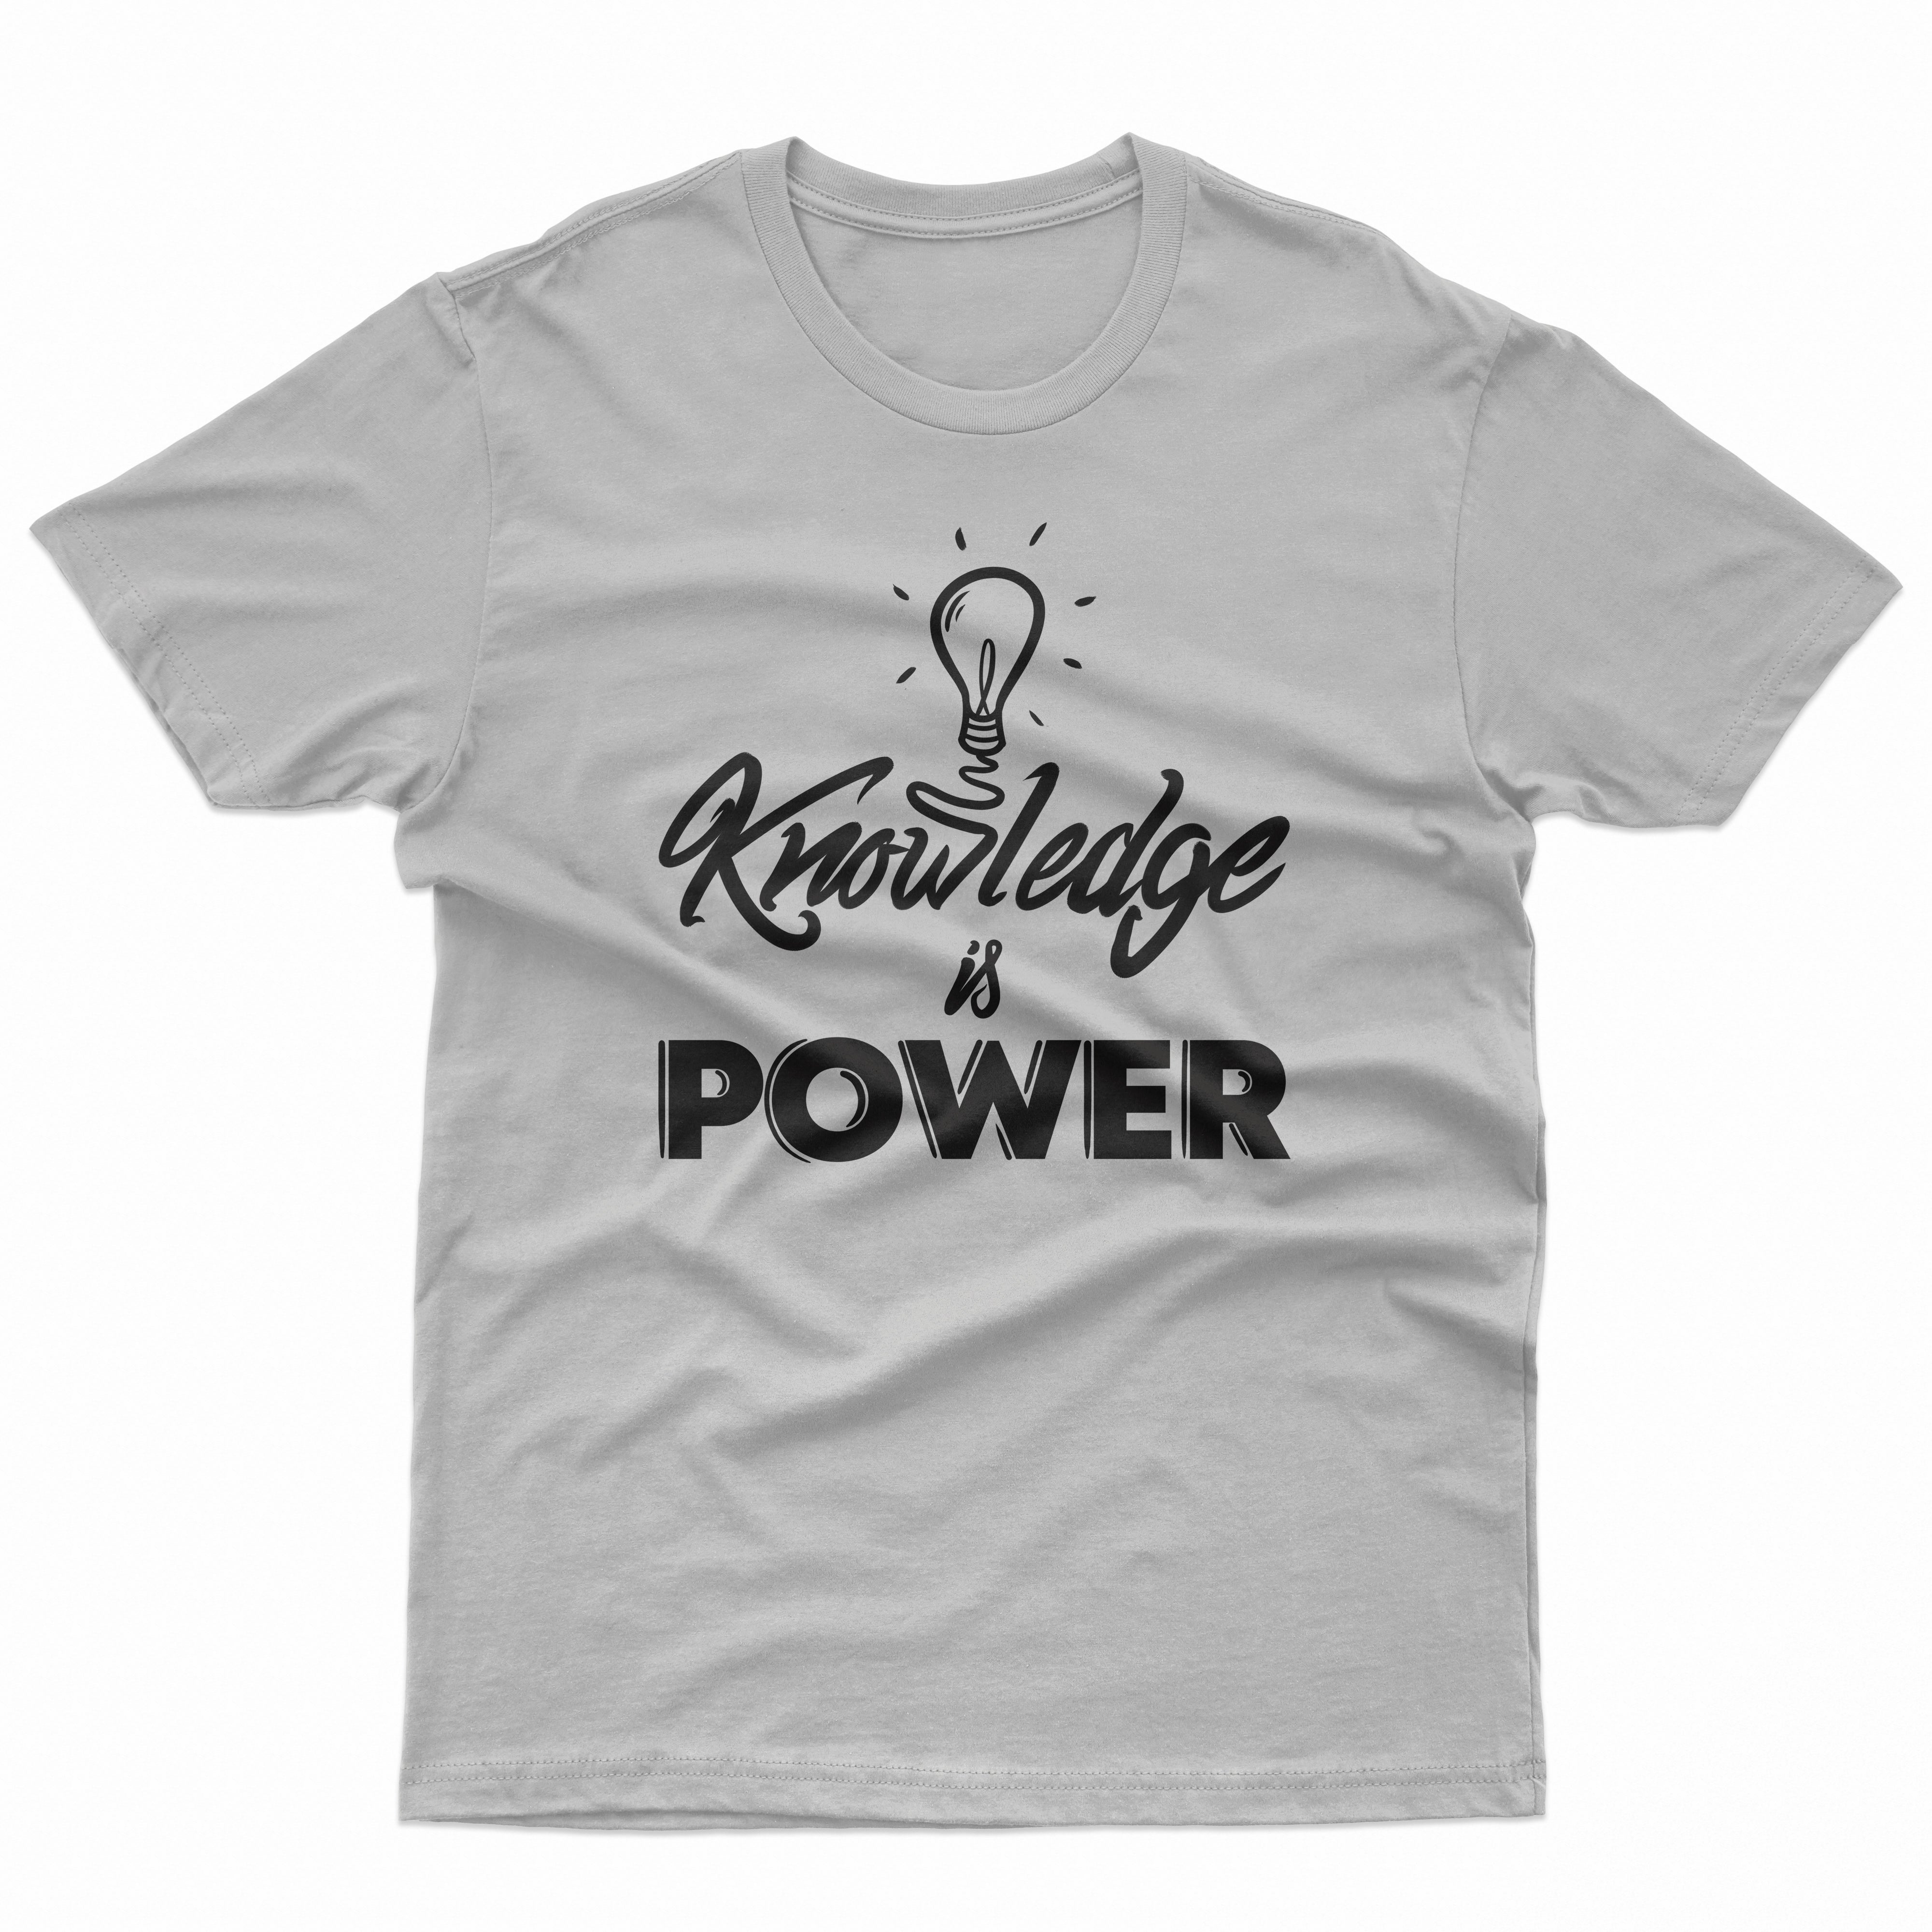 Knowledge is Power T Shirt